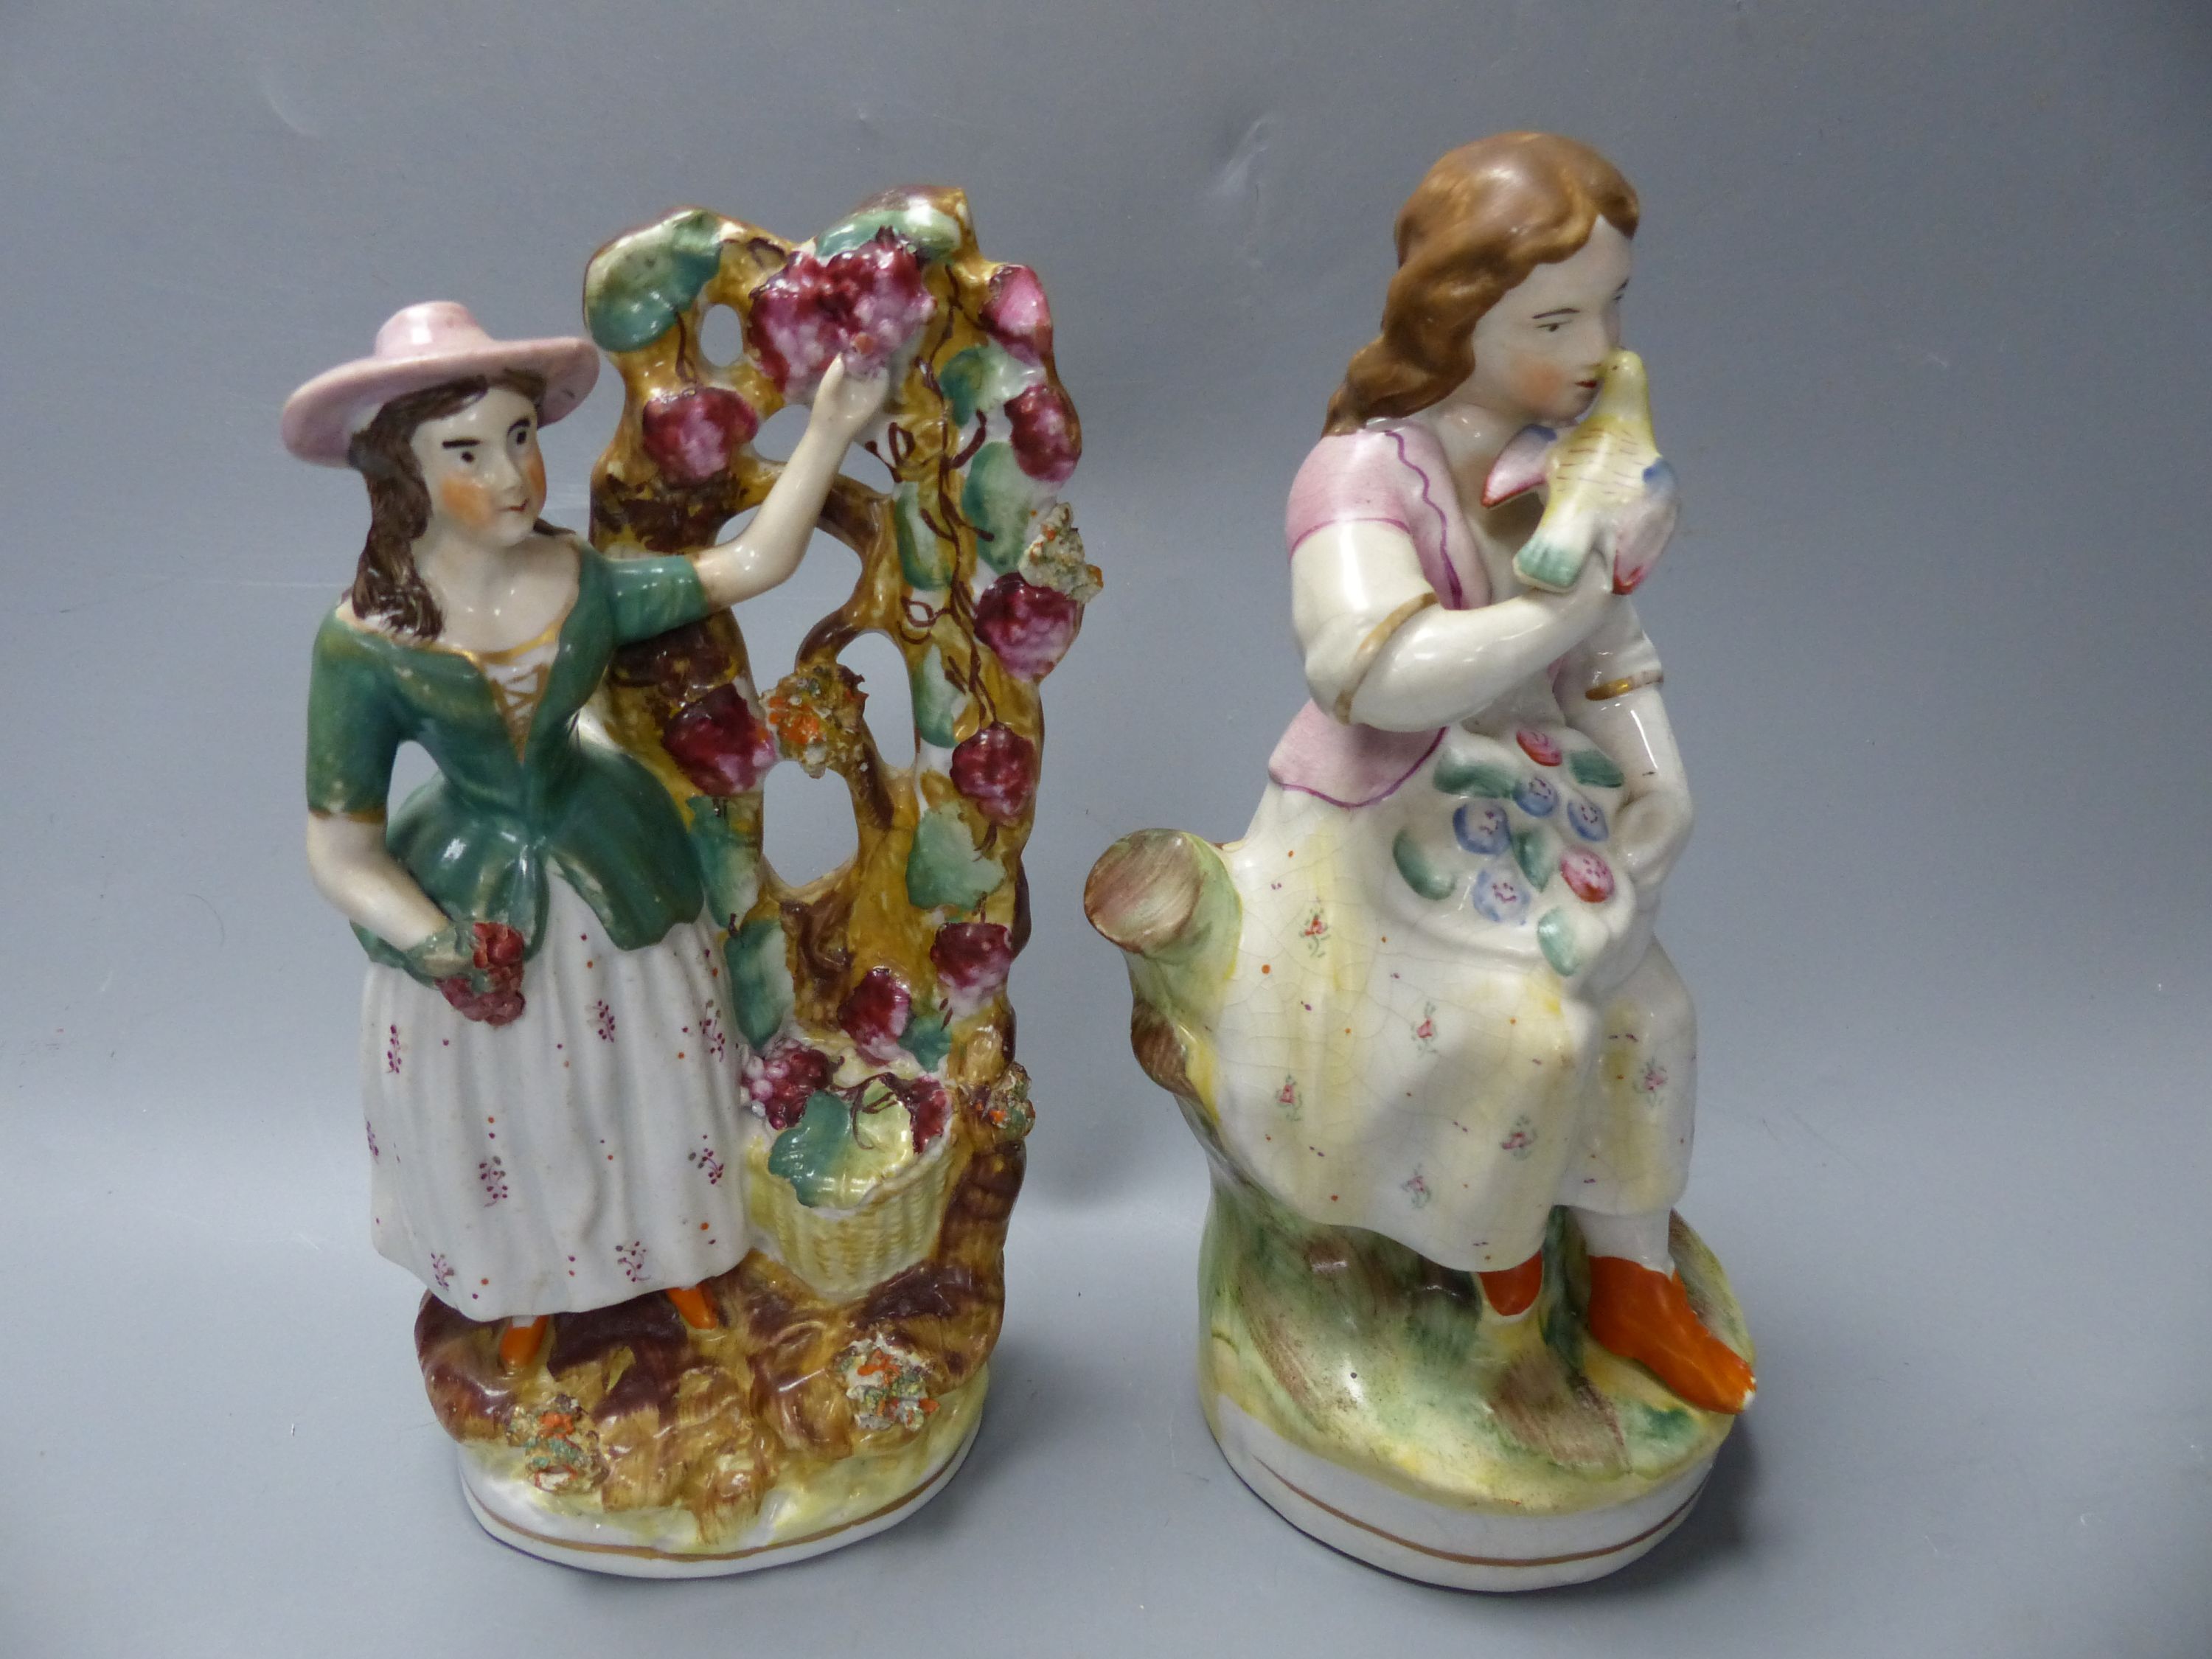 A Staffordshire figure of a female grape picker with vine bocage and three other figures